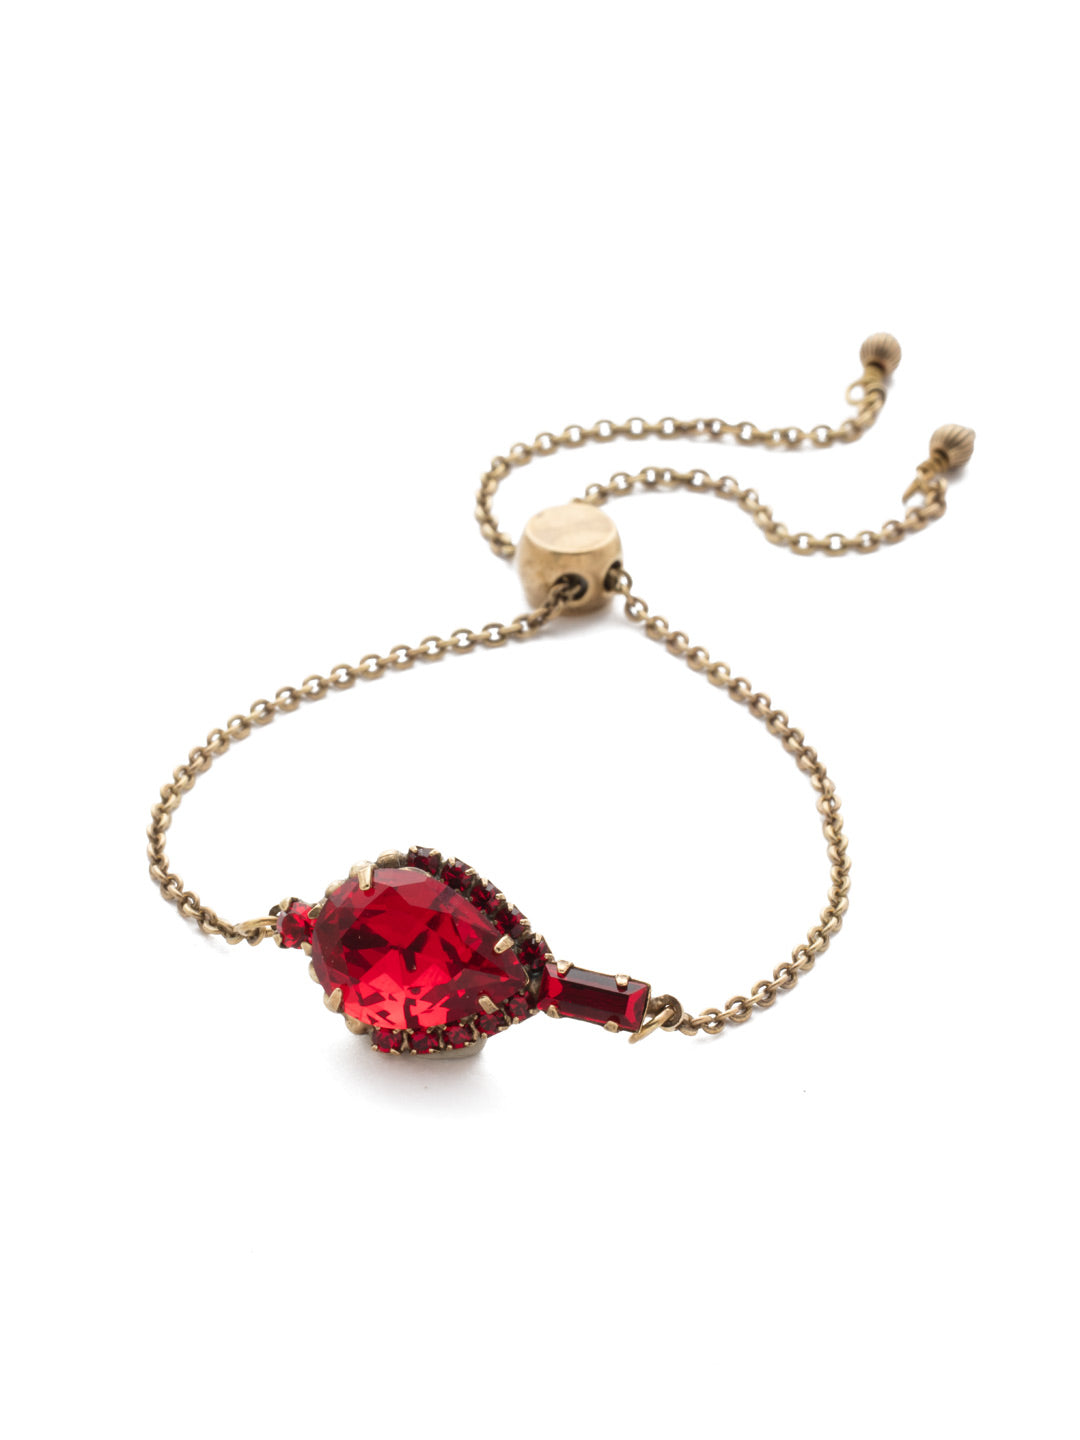 Lysa Slider Bracelet - BEF2AGSNR - A pear shaped crystal jewel is linked between two smaller crystals on a delicate chain that can be easily adjusted to create your own ideal fit. From Sorrelli's Sansa Red collection in our Antique Gold-tone finish.